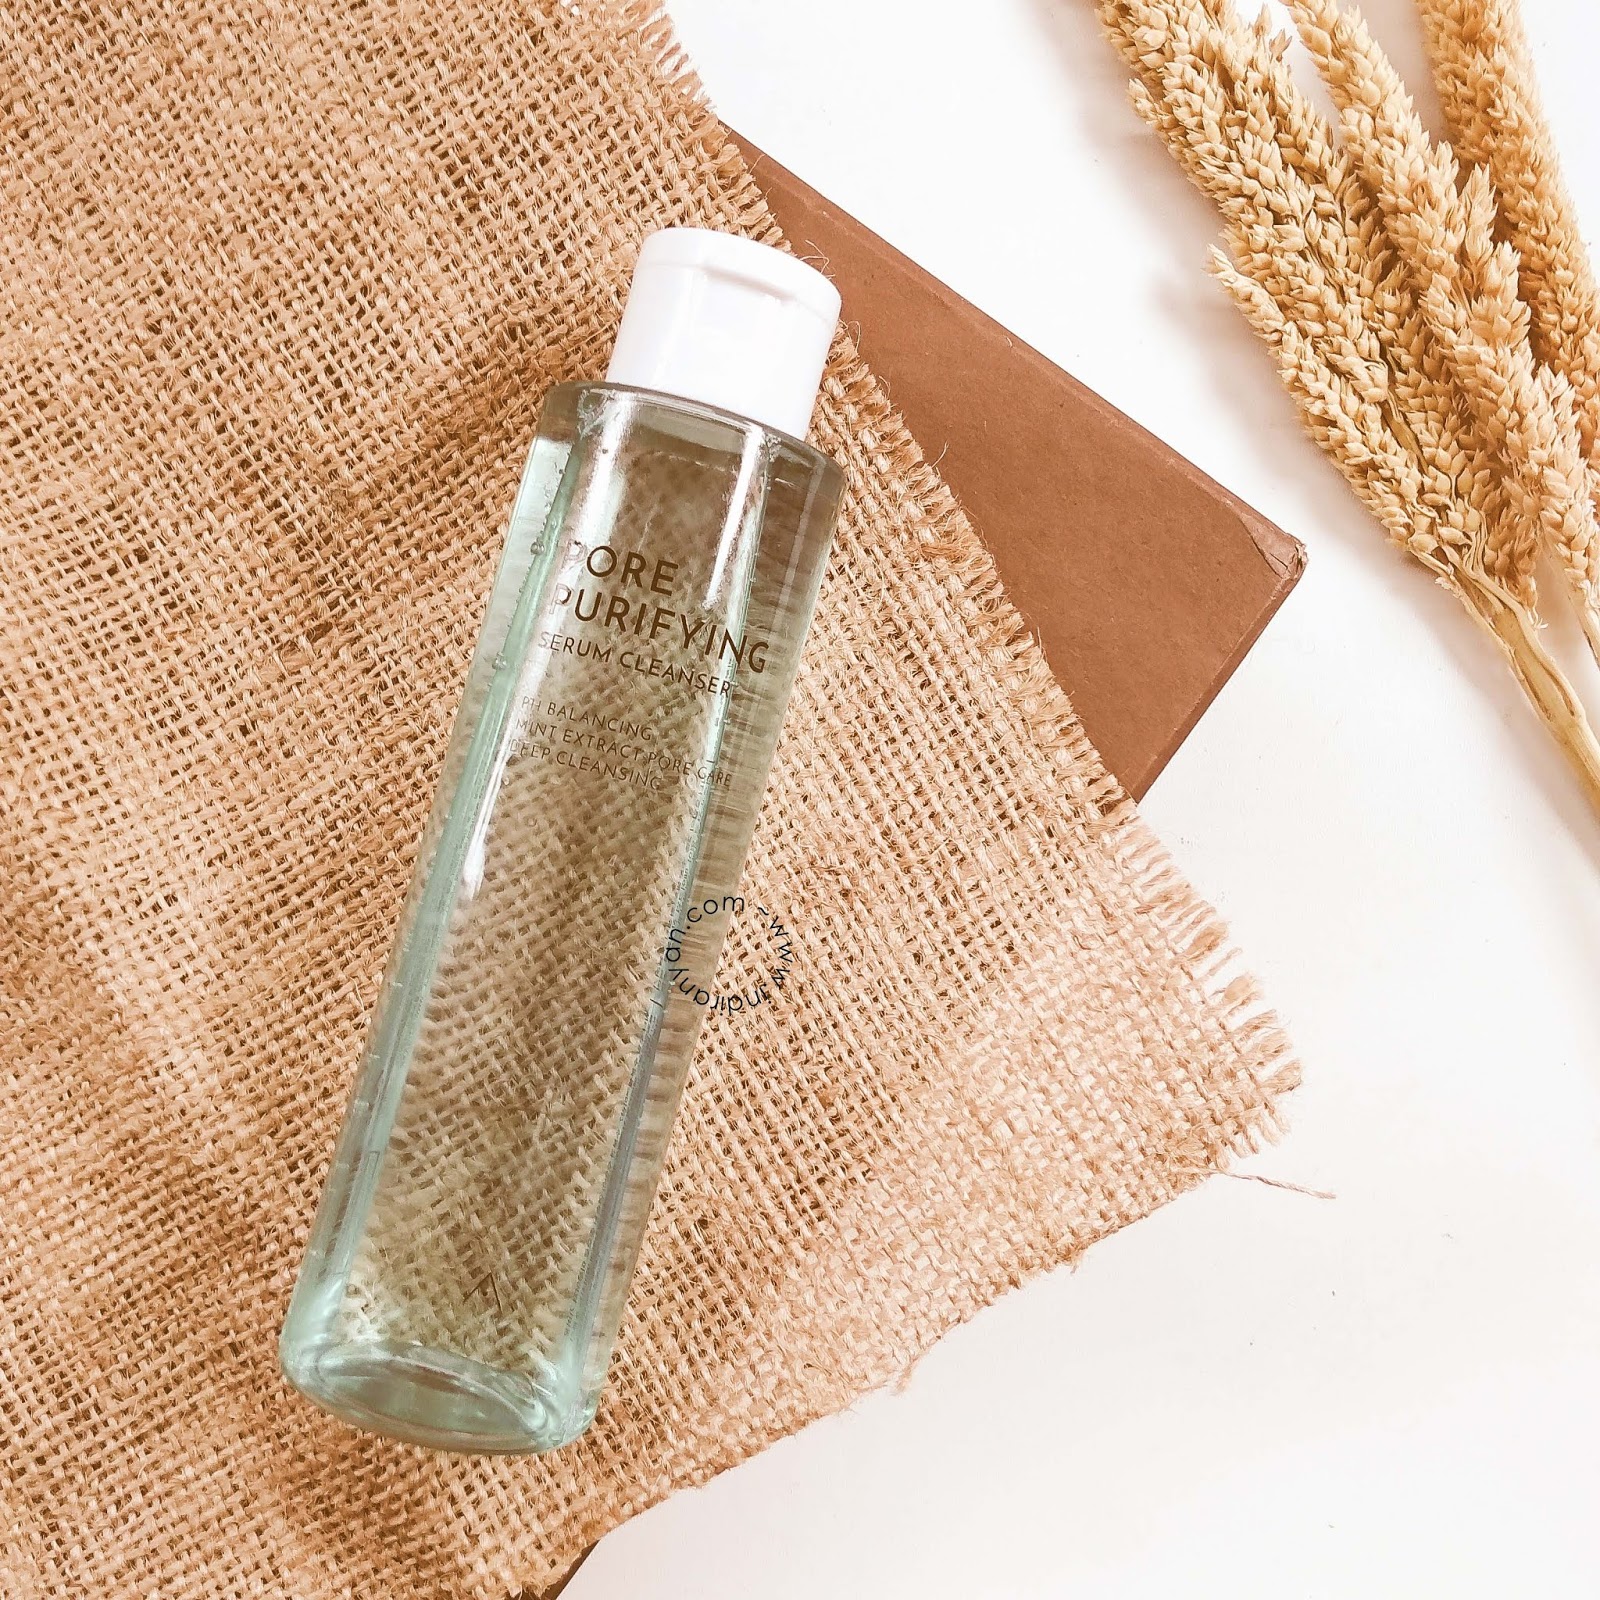 althea-pore-purifying-serum-cleanser